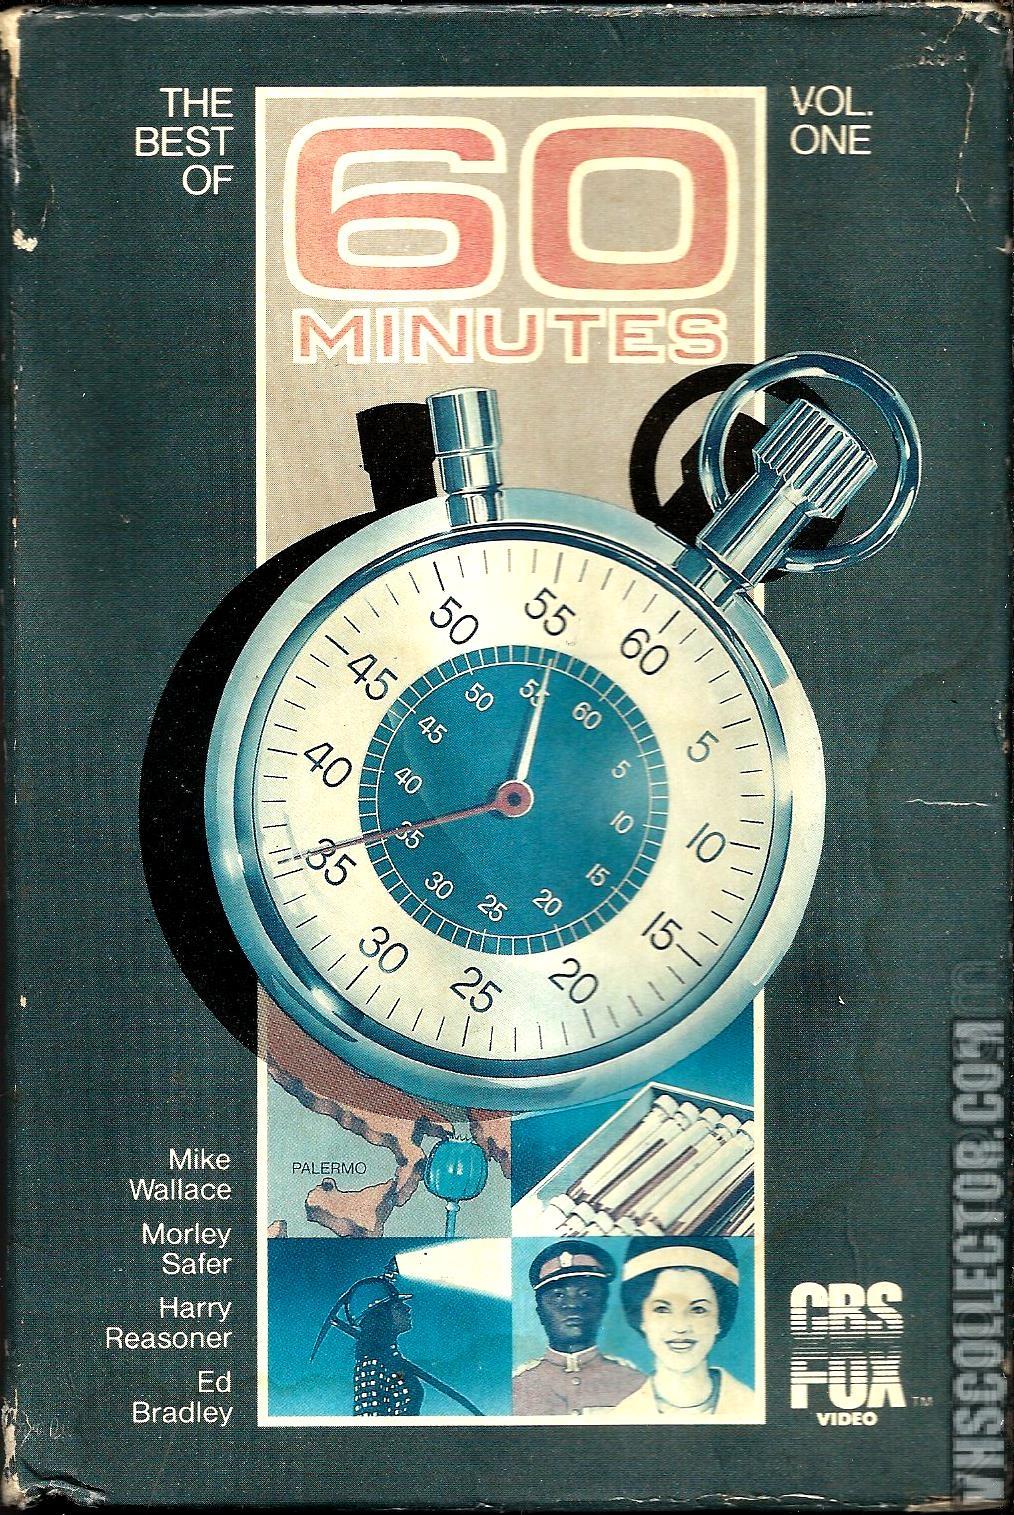 The Best of 60 Minutes | VHSCollector.com